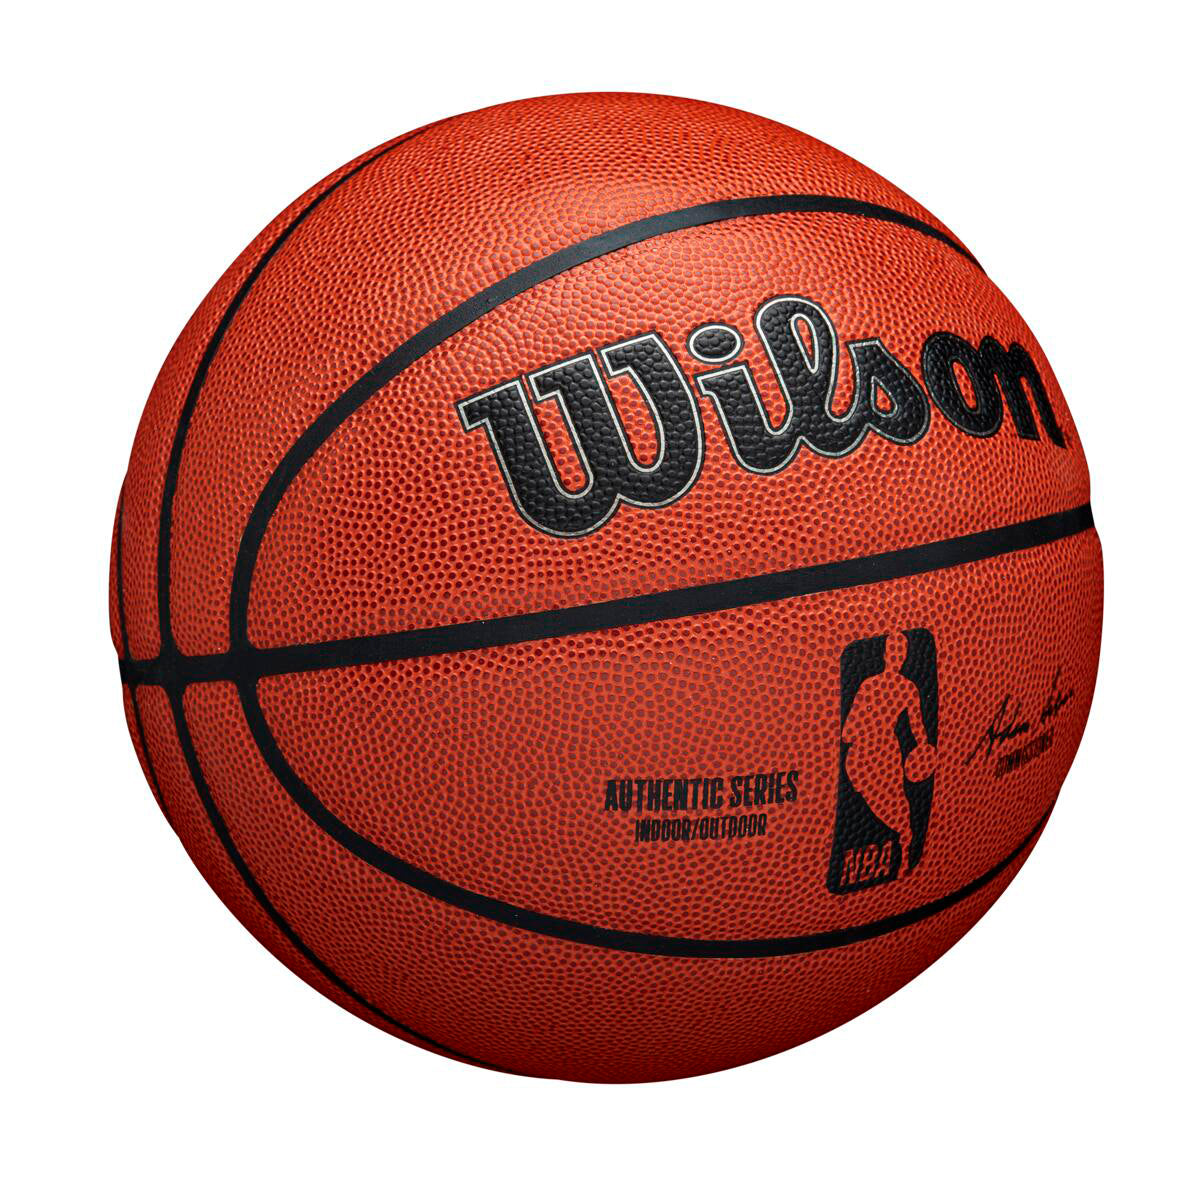 Wilson NBA  In/Out 7 Basketball Brown